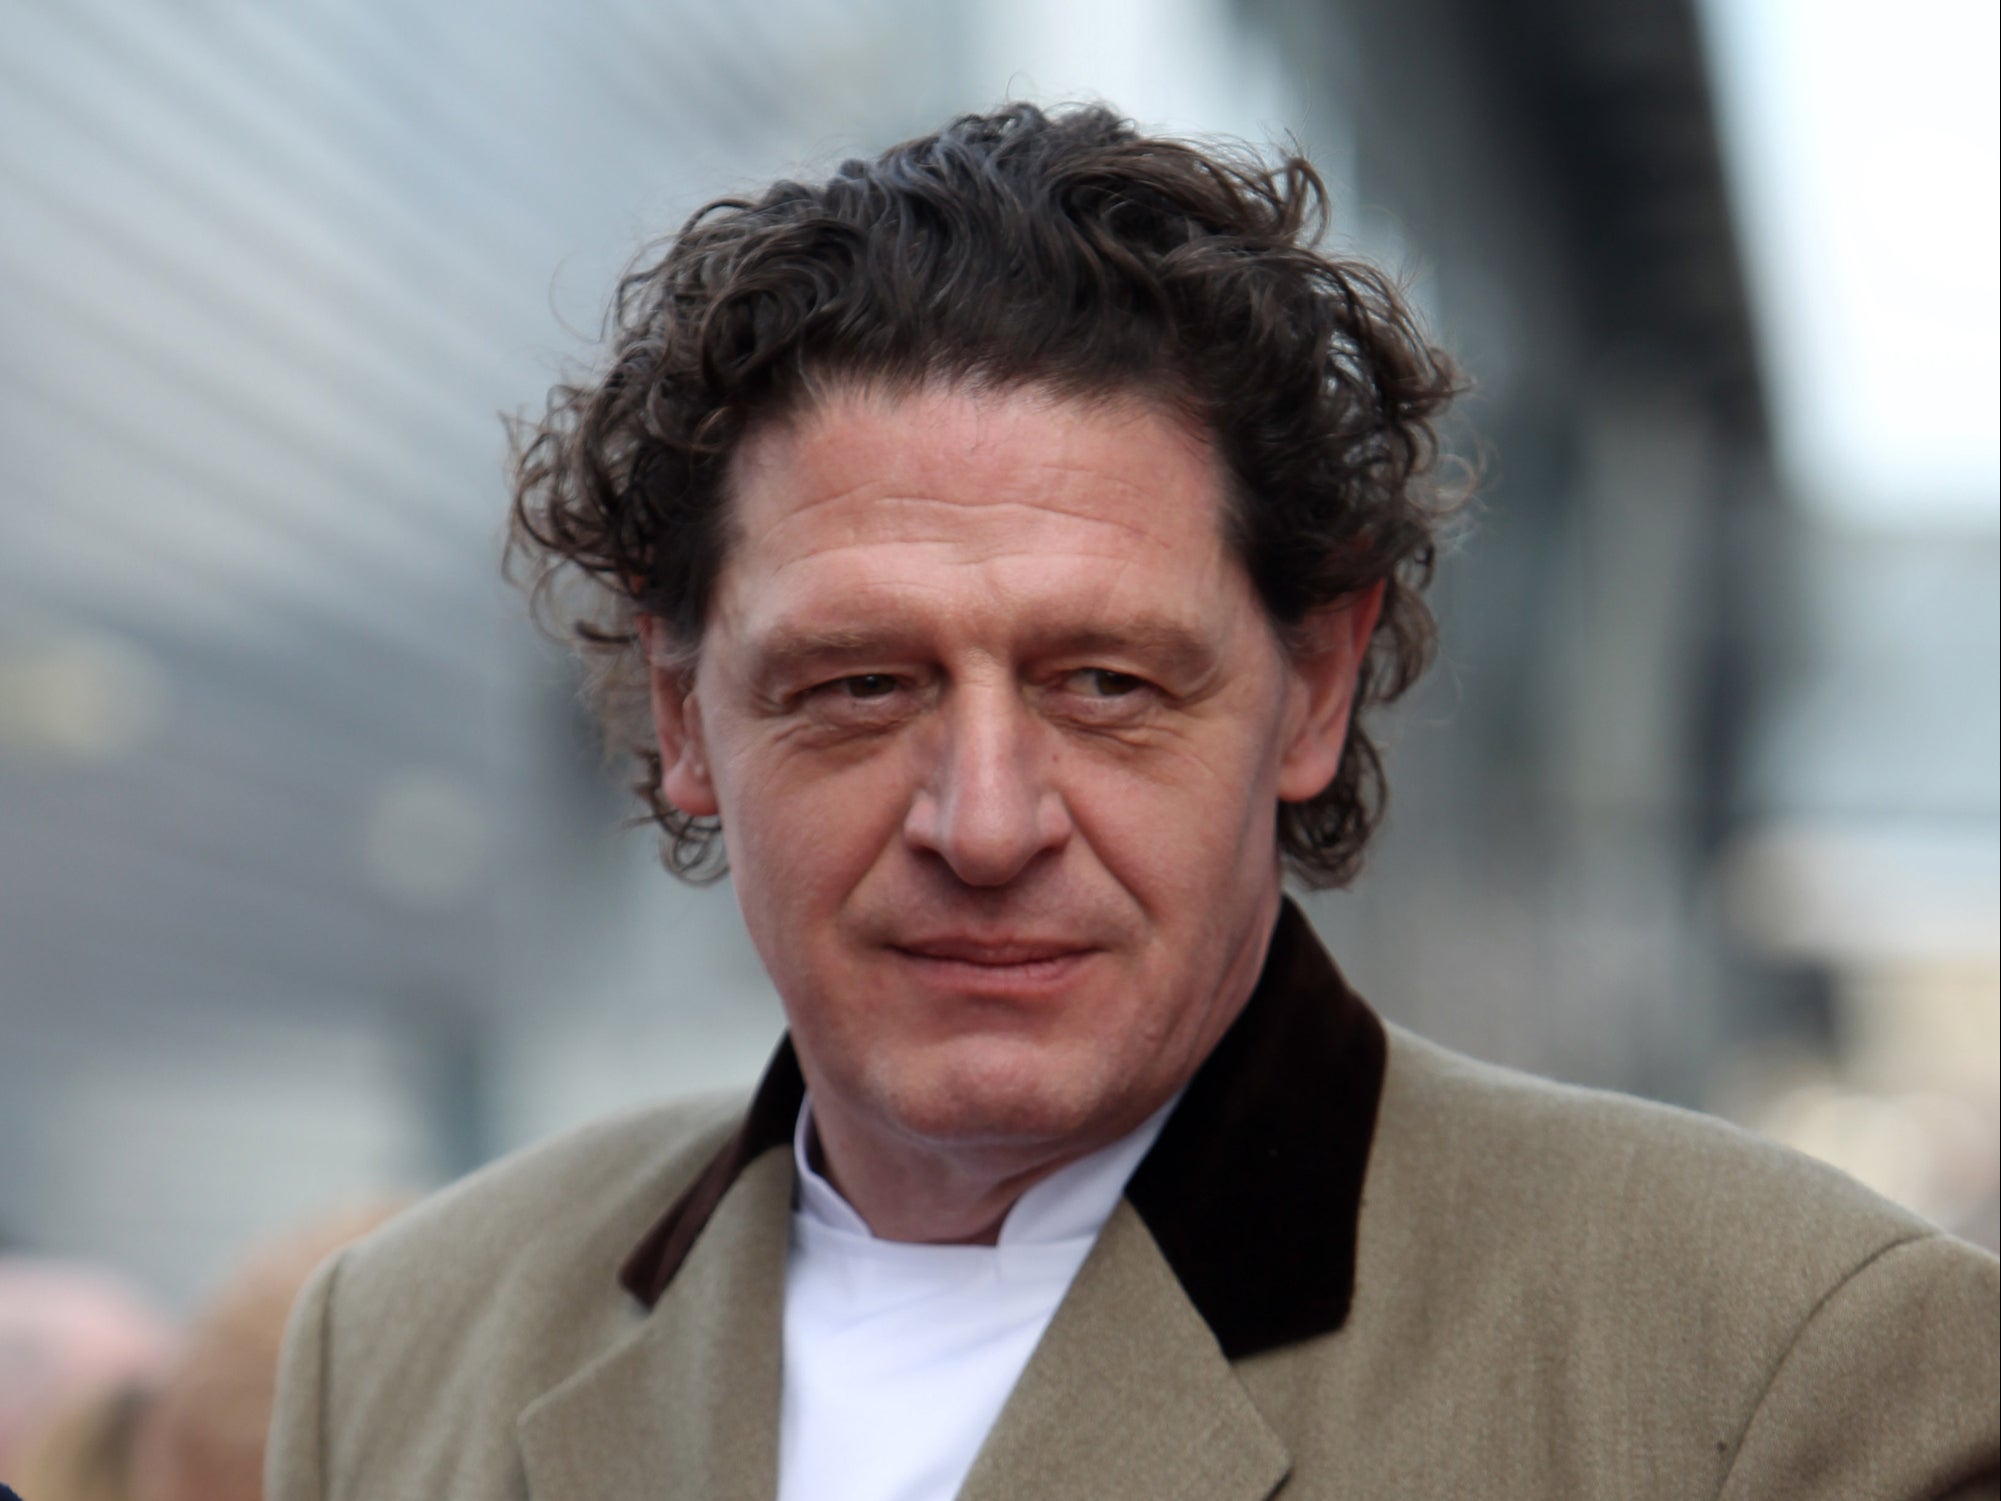 marco pierre white, tattoos gave marco pierre white’s son away when his trousers fell down during burglary